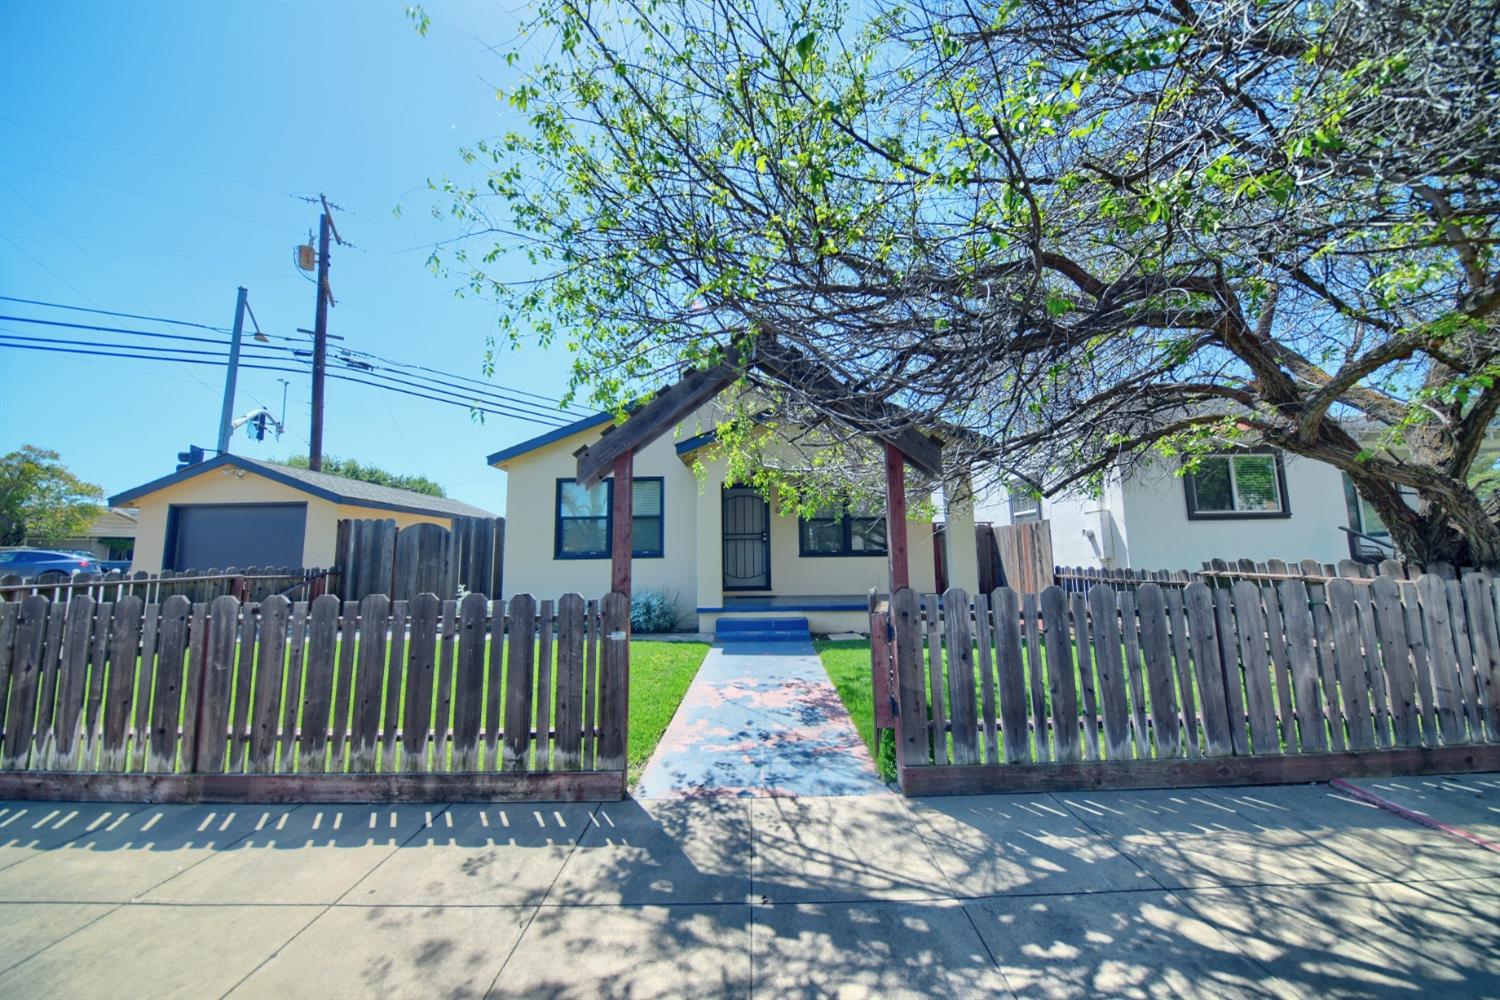 Photo of 623 Maple St in Livermore, CA